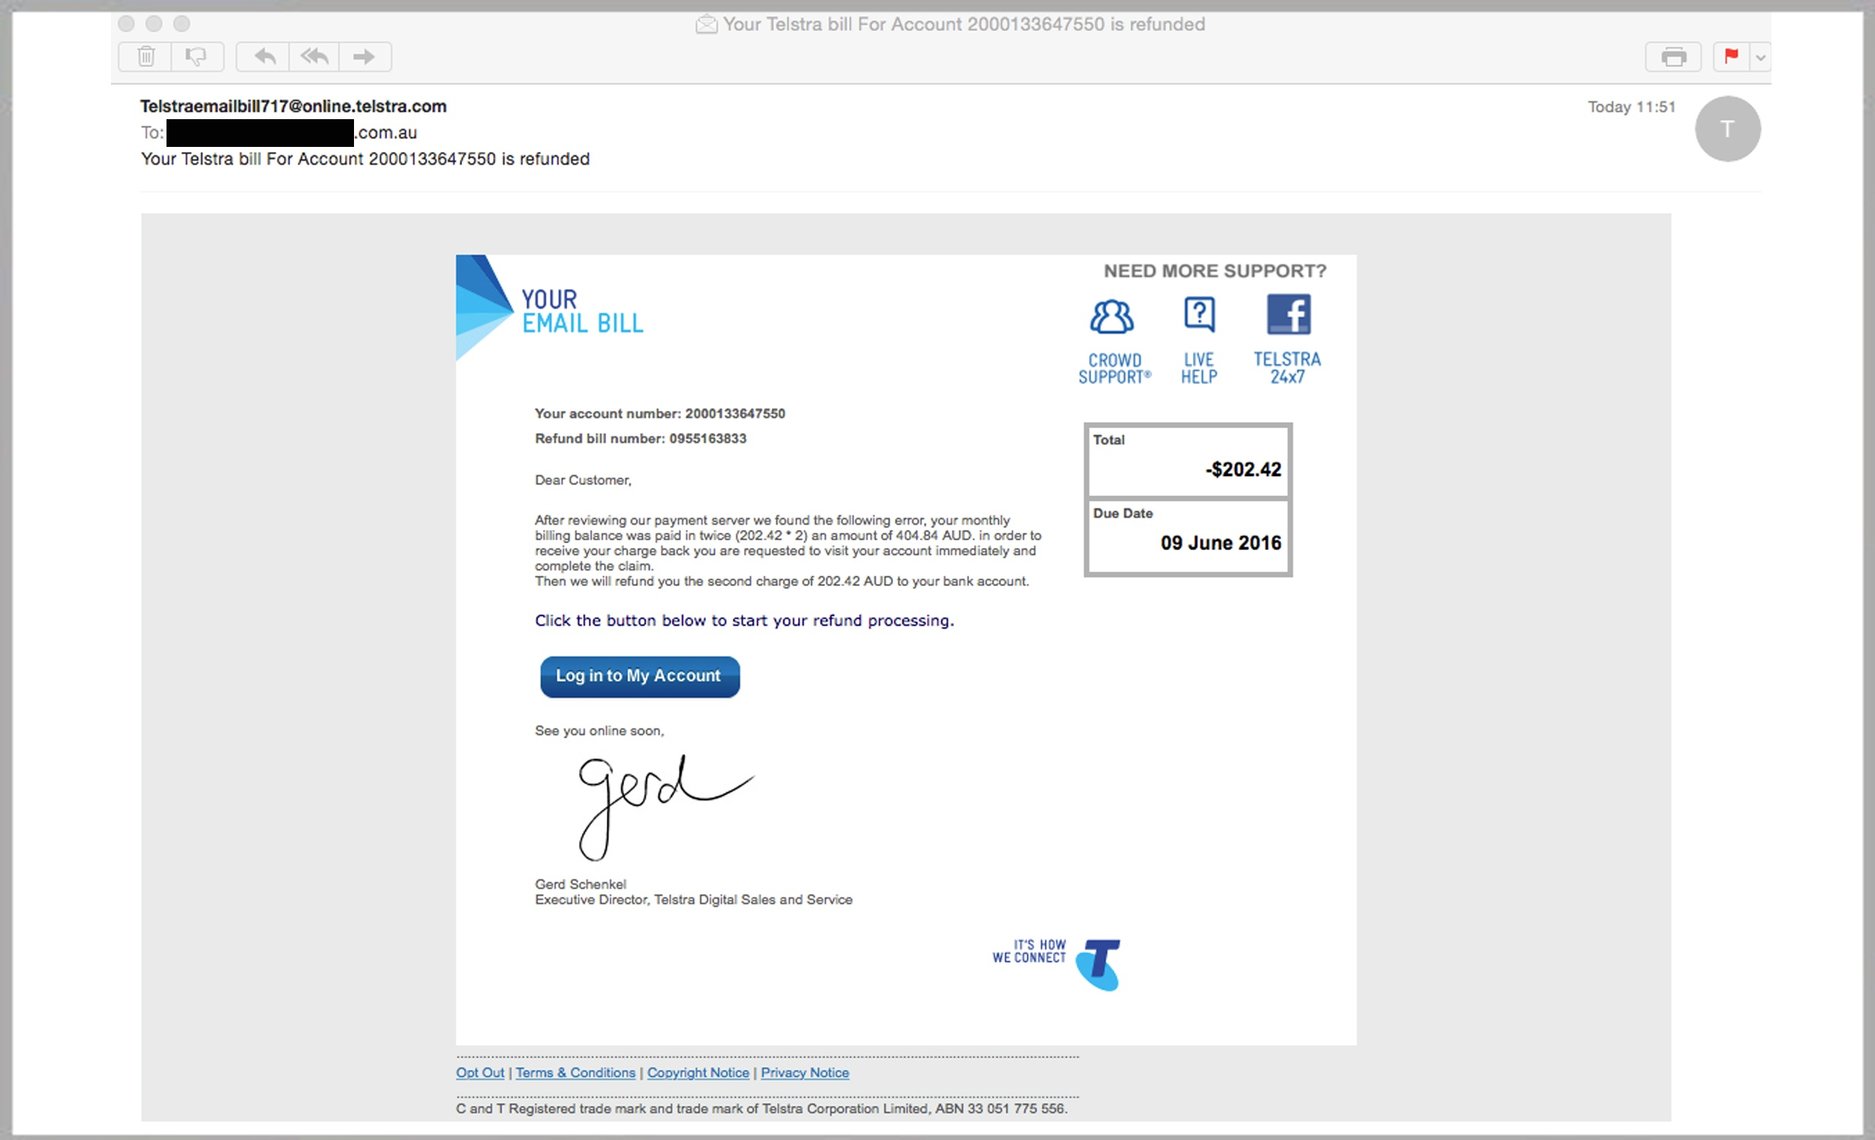 Breaking Cyber Criminal Poses As Telstra In New Phishing Scam